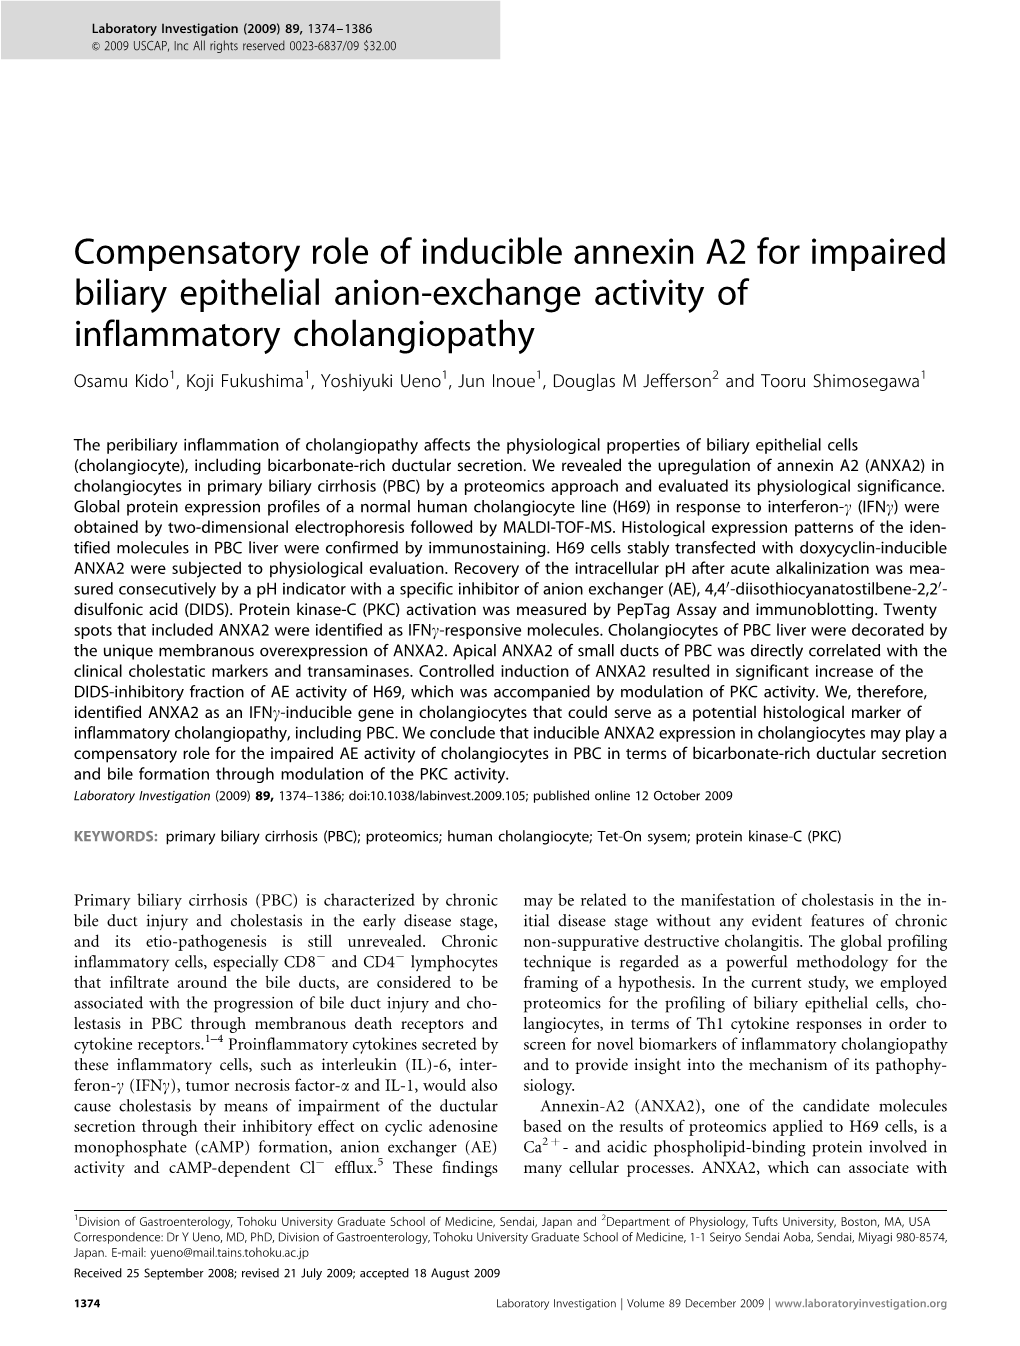 Compensatory Role of Inducible Annexin A2 for Impaired Biliary Epithelial Anion-Exchange Activity of Inflammatory Cholangiopathy